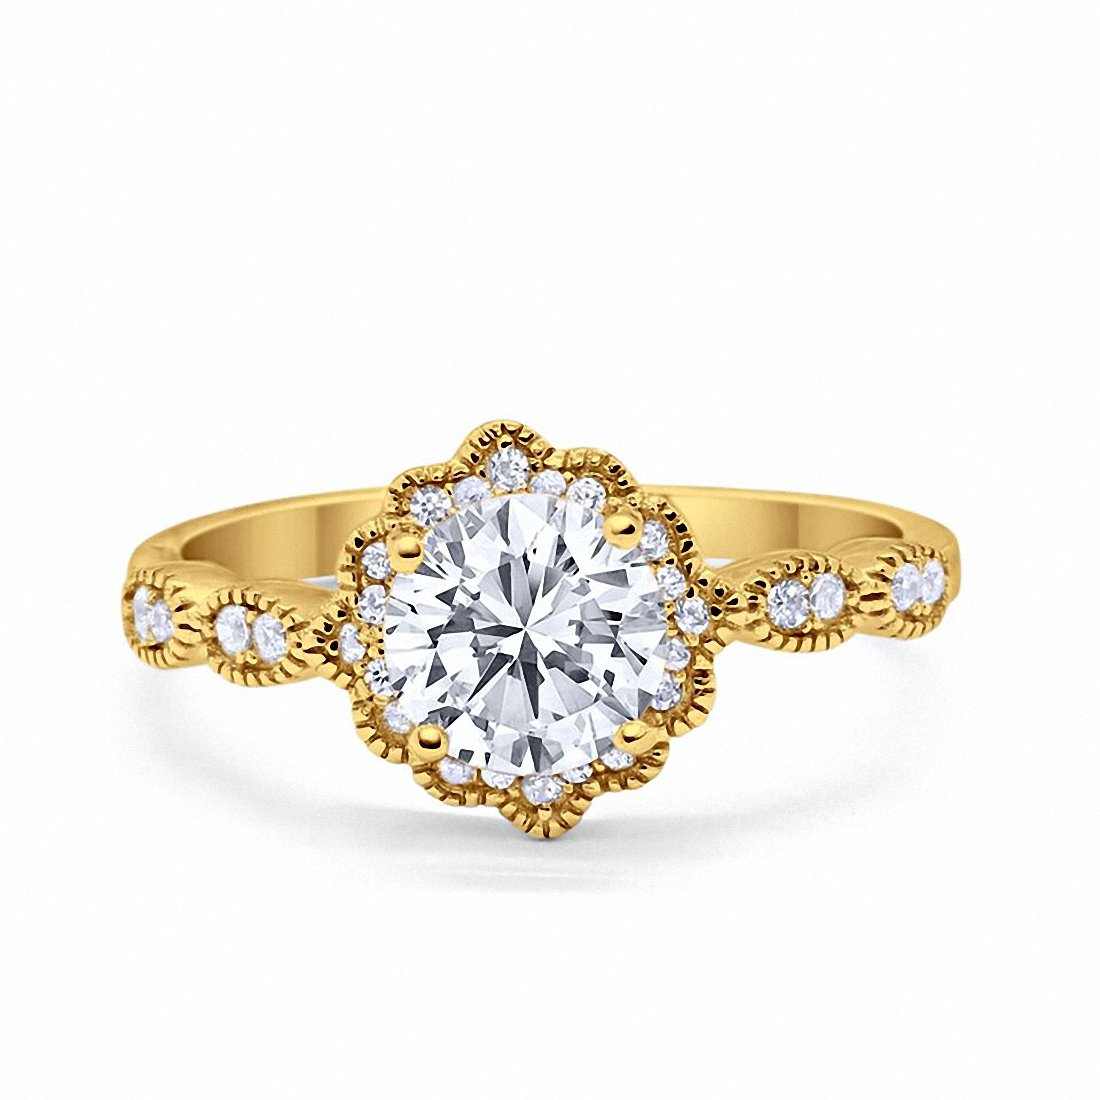 Floral Art Engagement Ring Yellow Tone, Simulated CZ 925 Sterling Silver